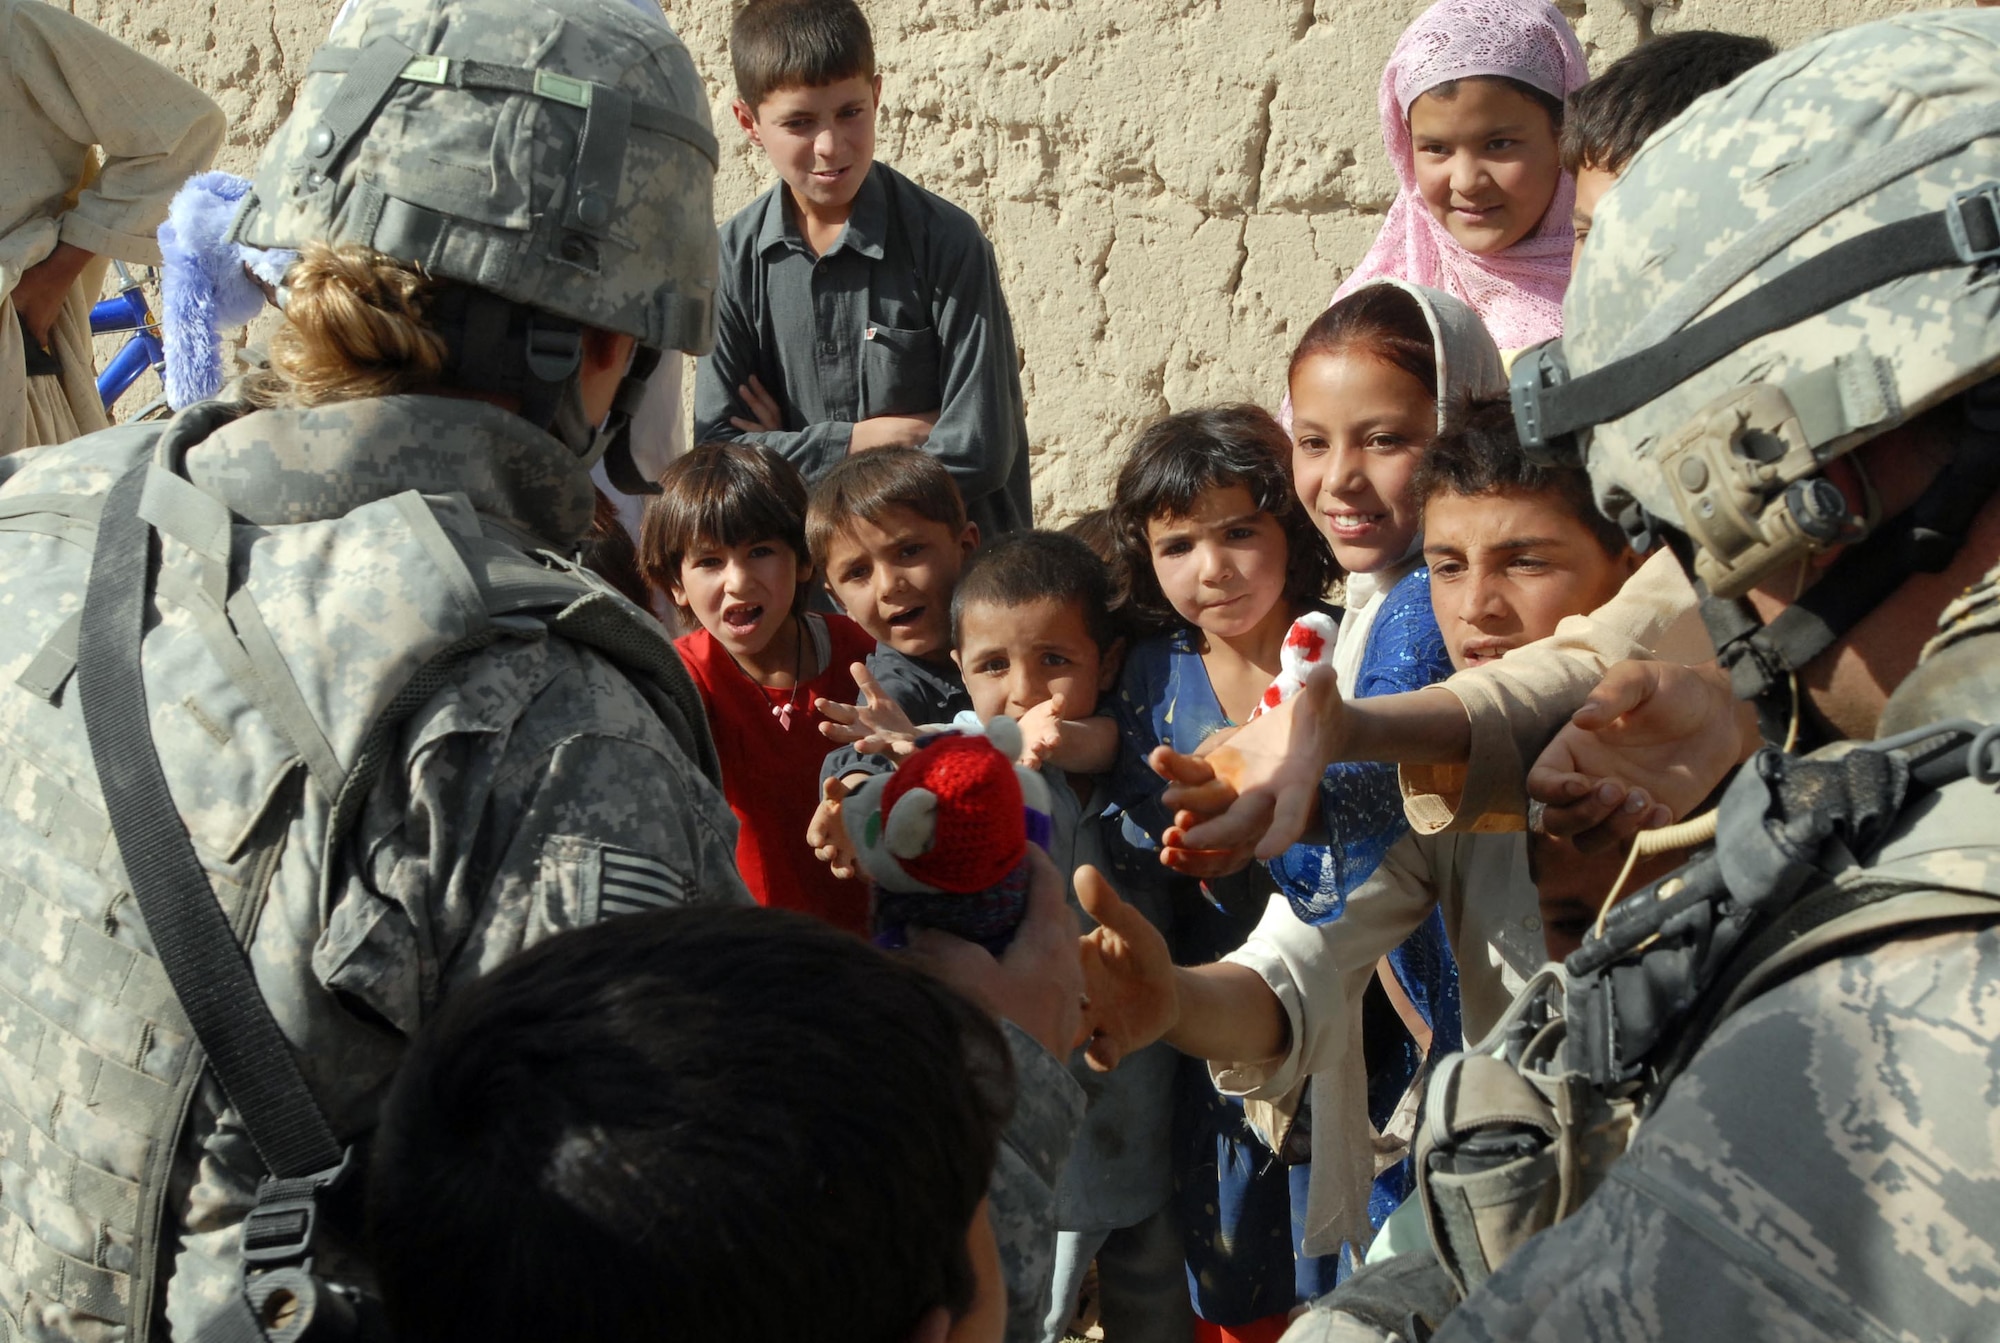 LOGAR PROVINCE, Afghanistan - Tech. Sgts. Michelle Stokes (left) and Brandon Livingstone (right), counter improvised explosive device team, out of Forward Operating Base Shank distribute school supplies, toys and shoes to children in the village of Polerad. (U.S. Army photo/Pfc. Melissa Stewart)